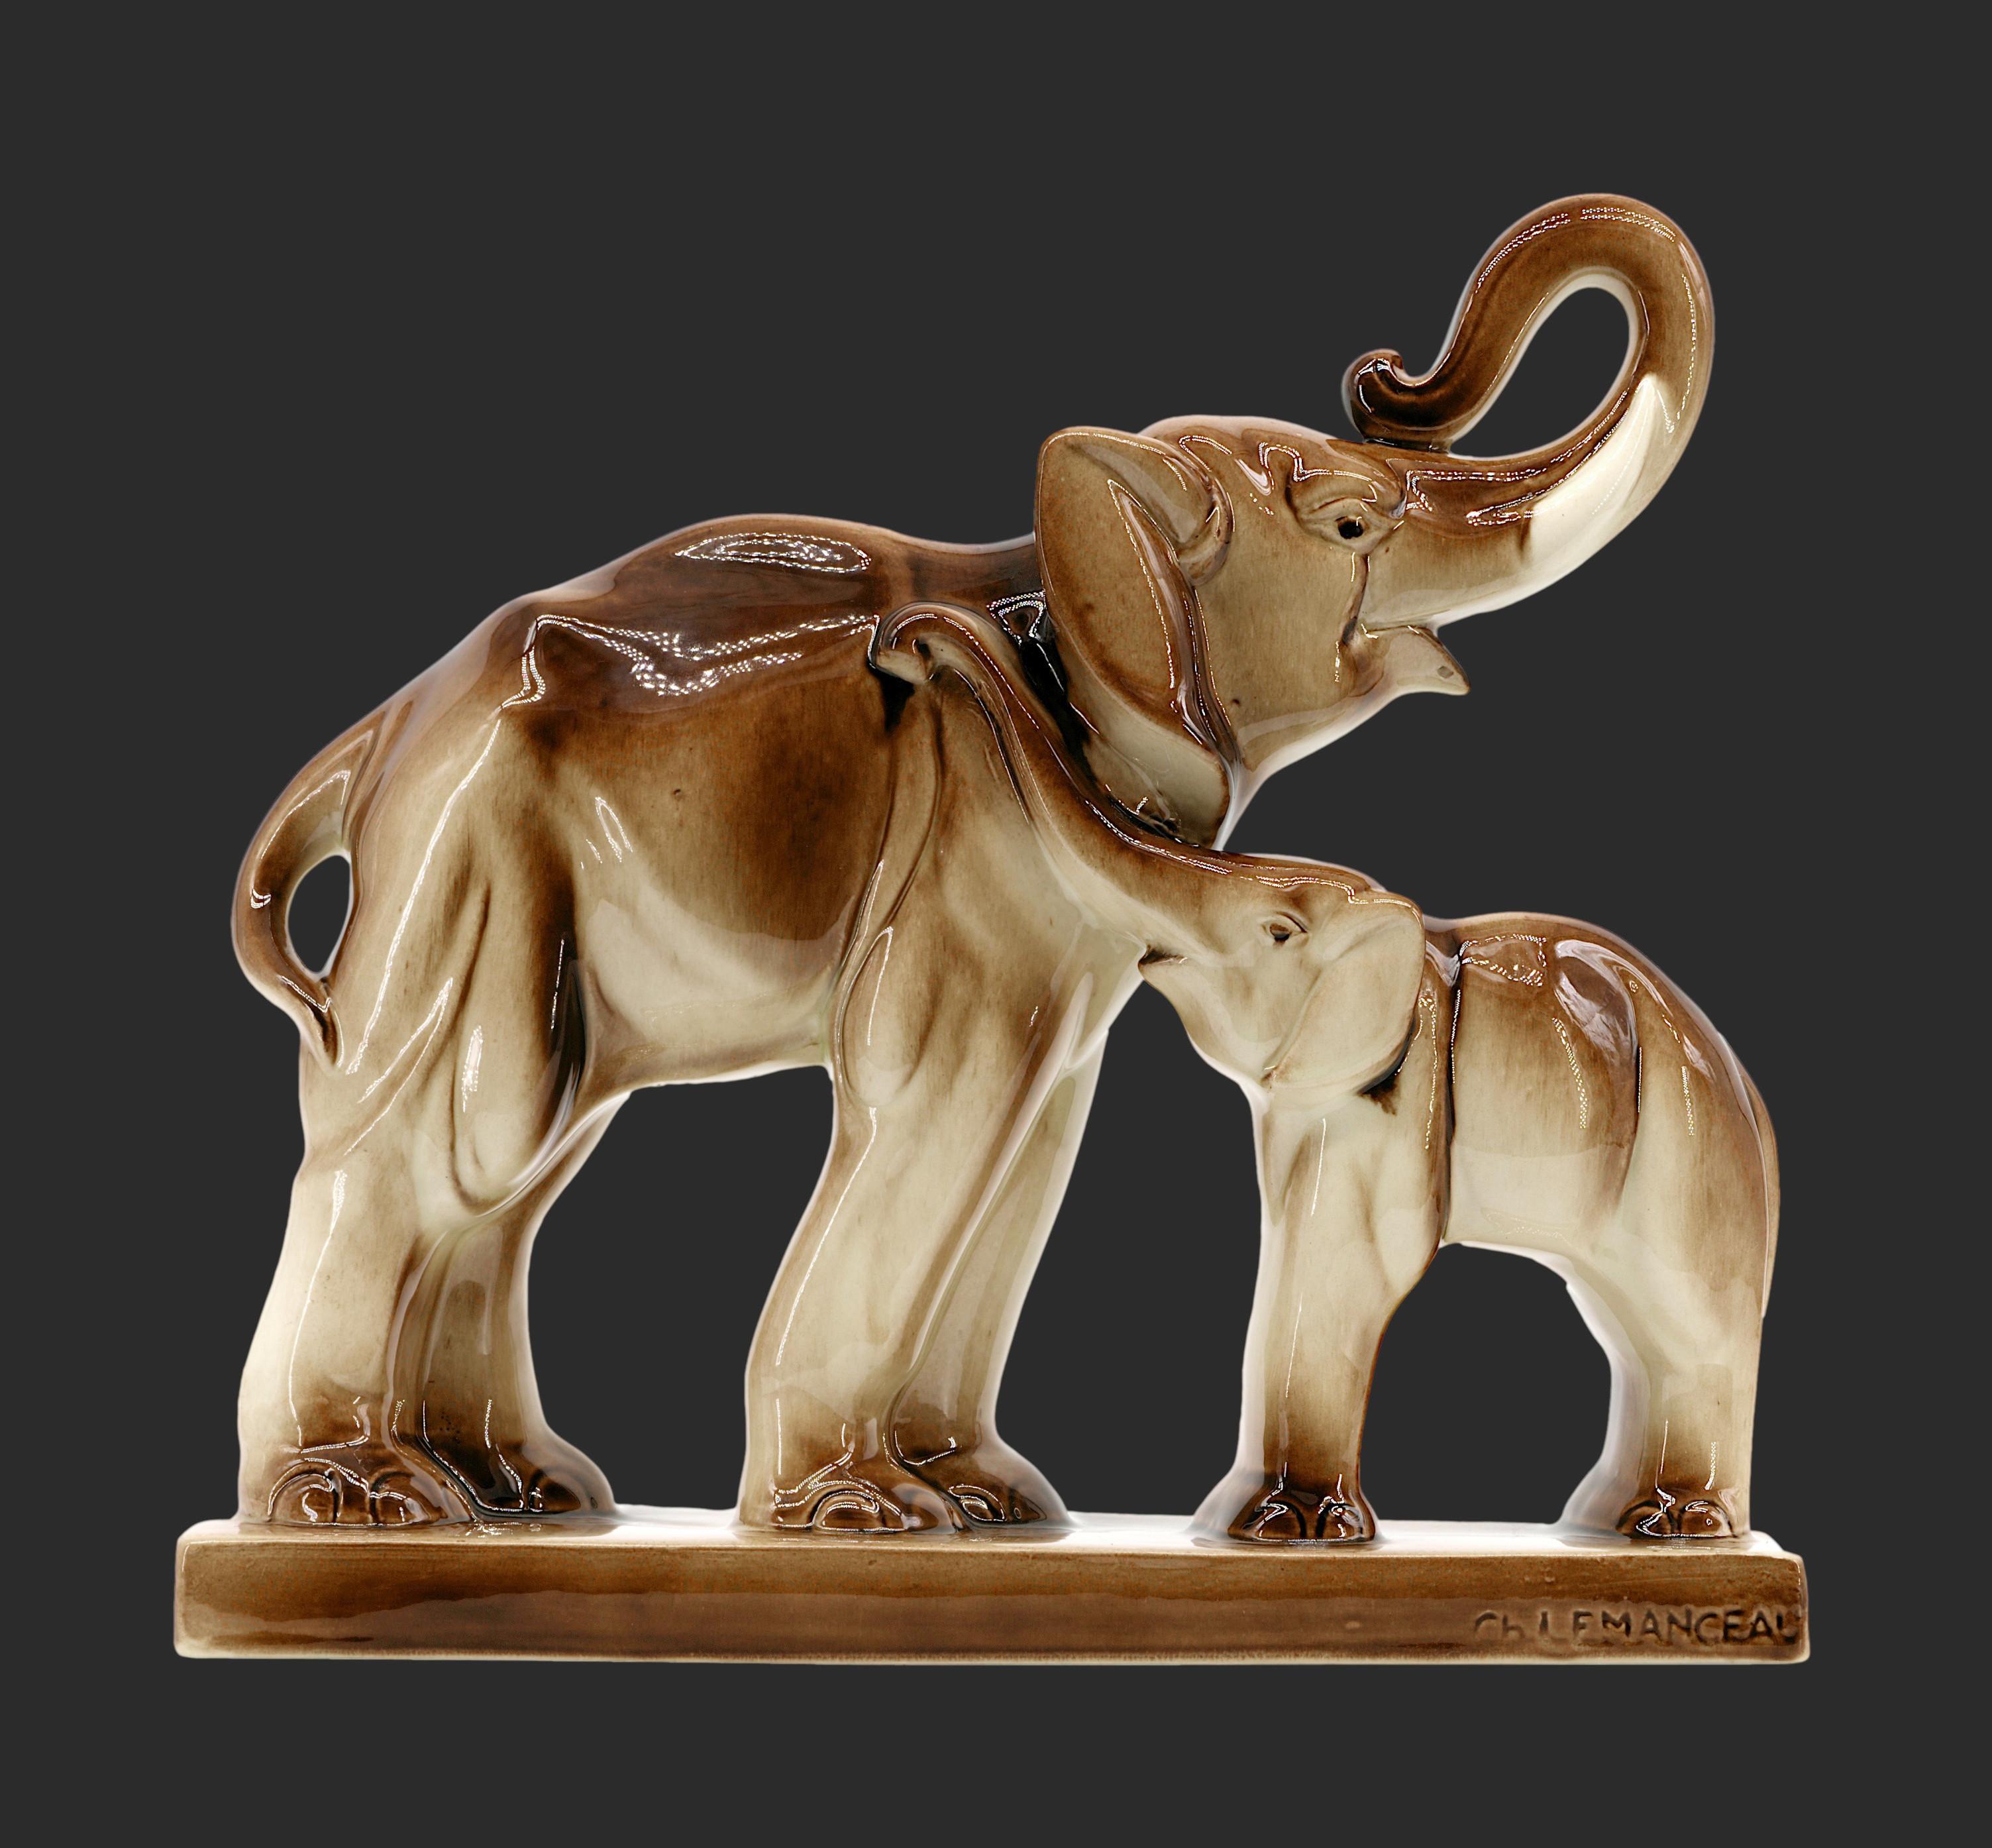 Couple of elephants by Charles Lemanceau at Saint-Clement's, France, circa 1935. French art ceramic. Mother and child. Measures: Width: 13.4